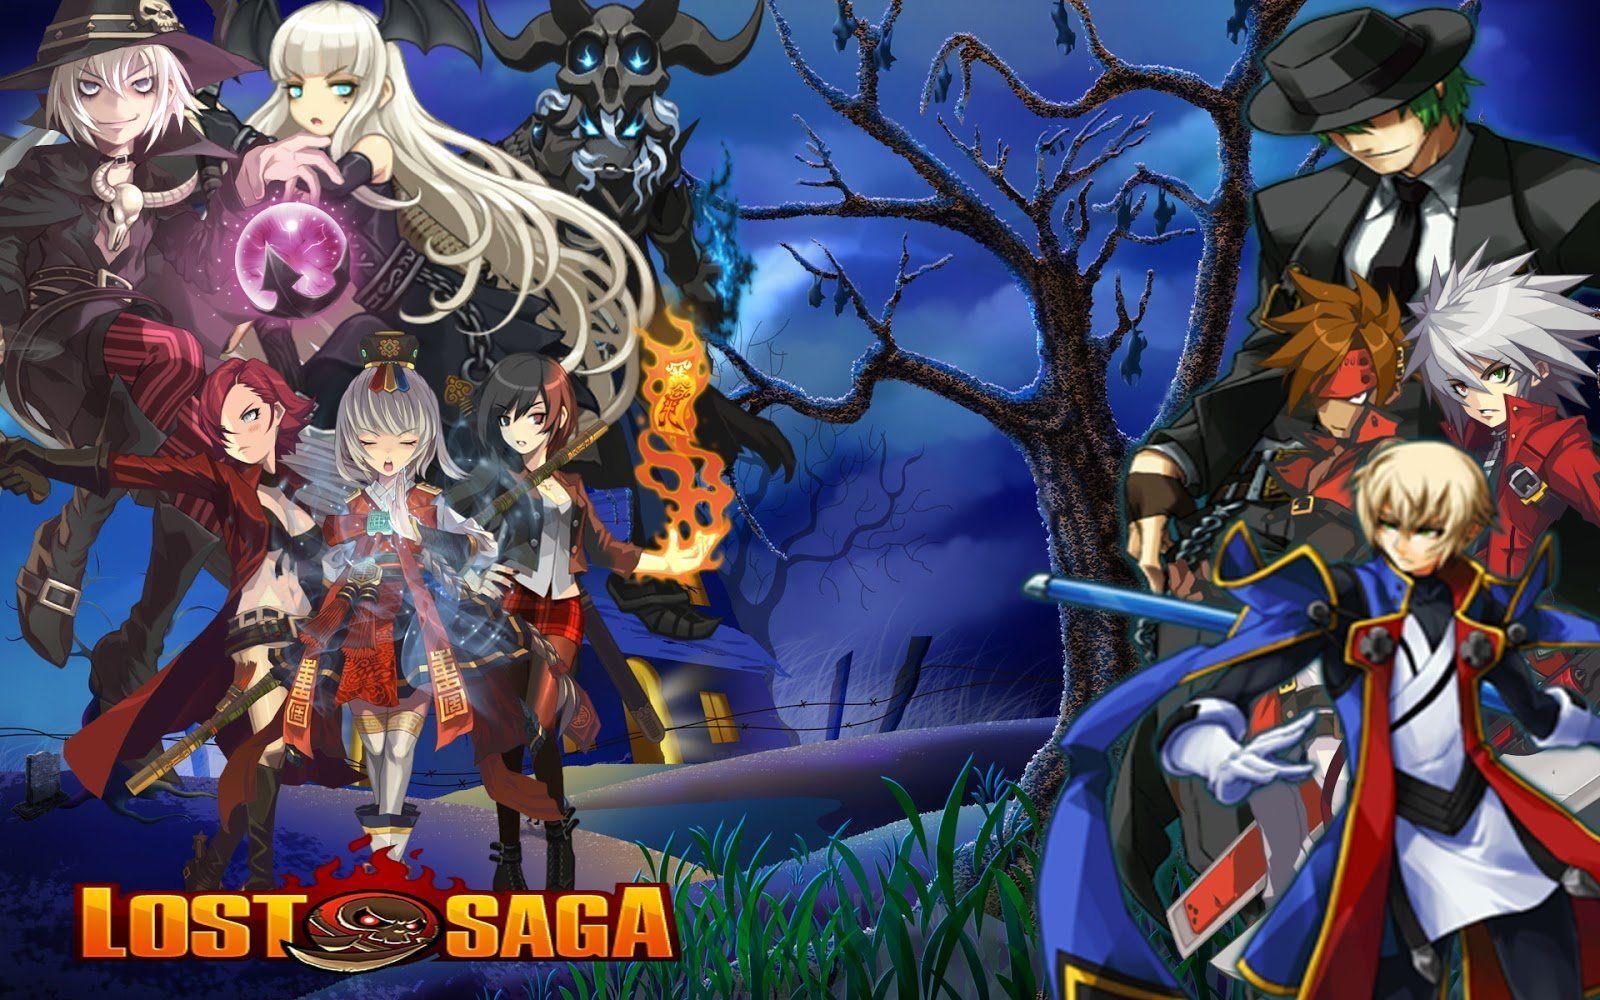 LOST SAGA mmo fantasy anime fighting 1losts dungeon action rpg